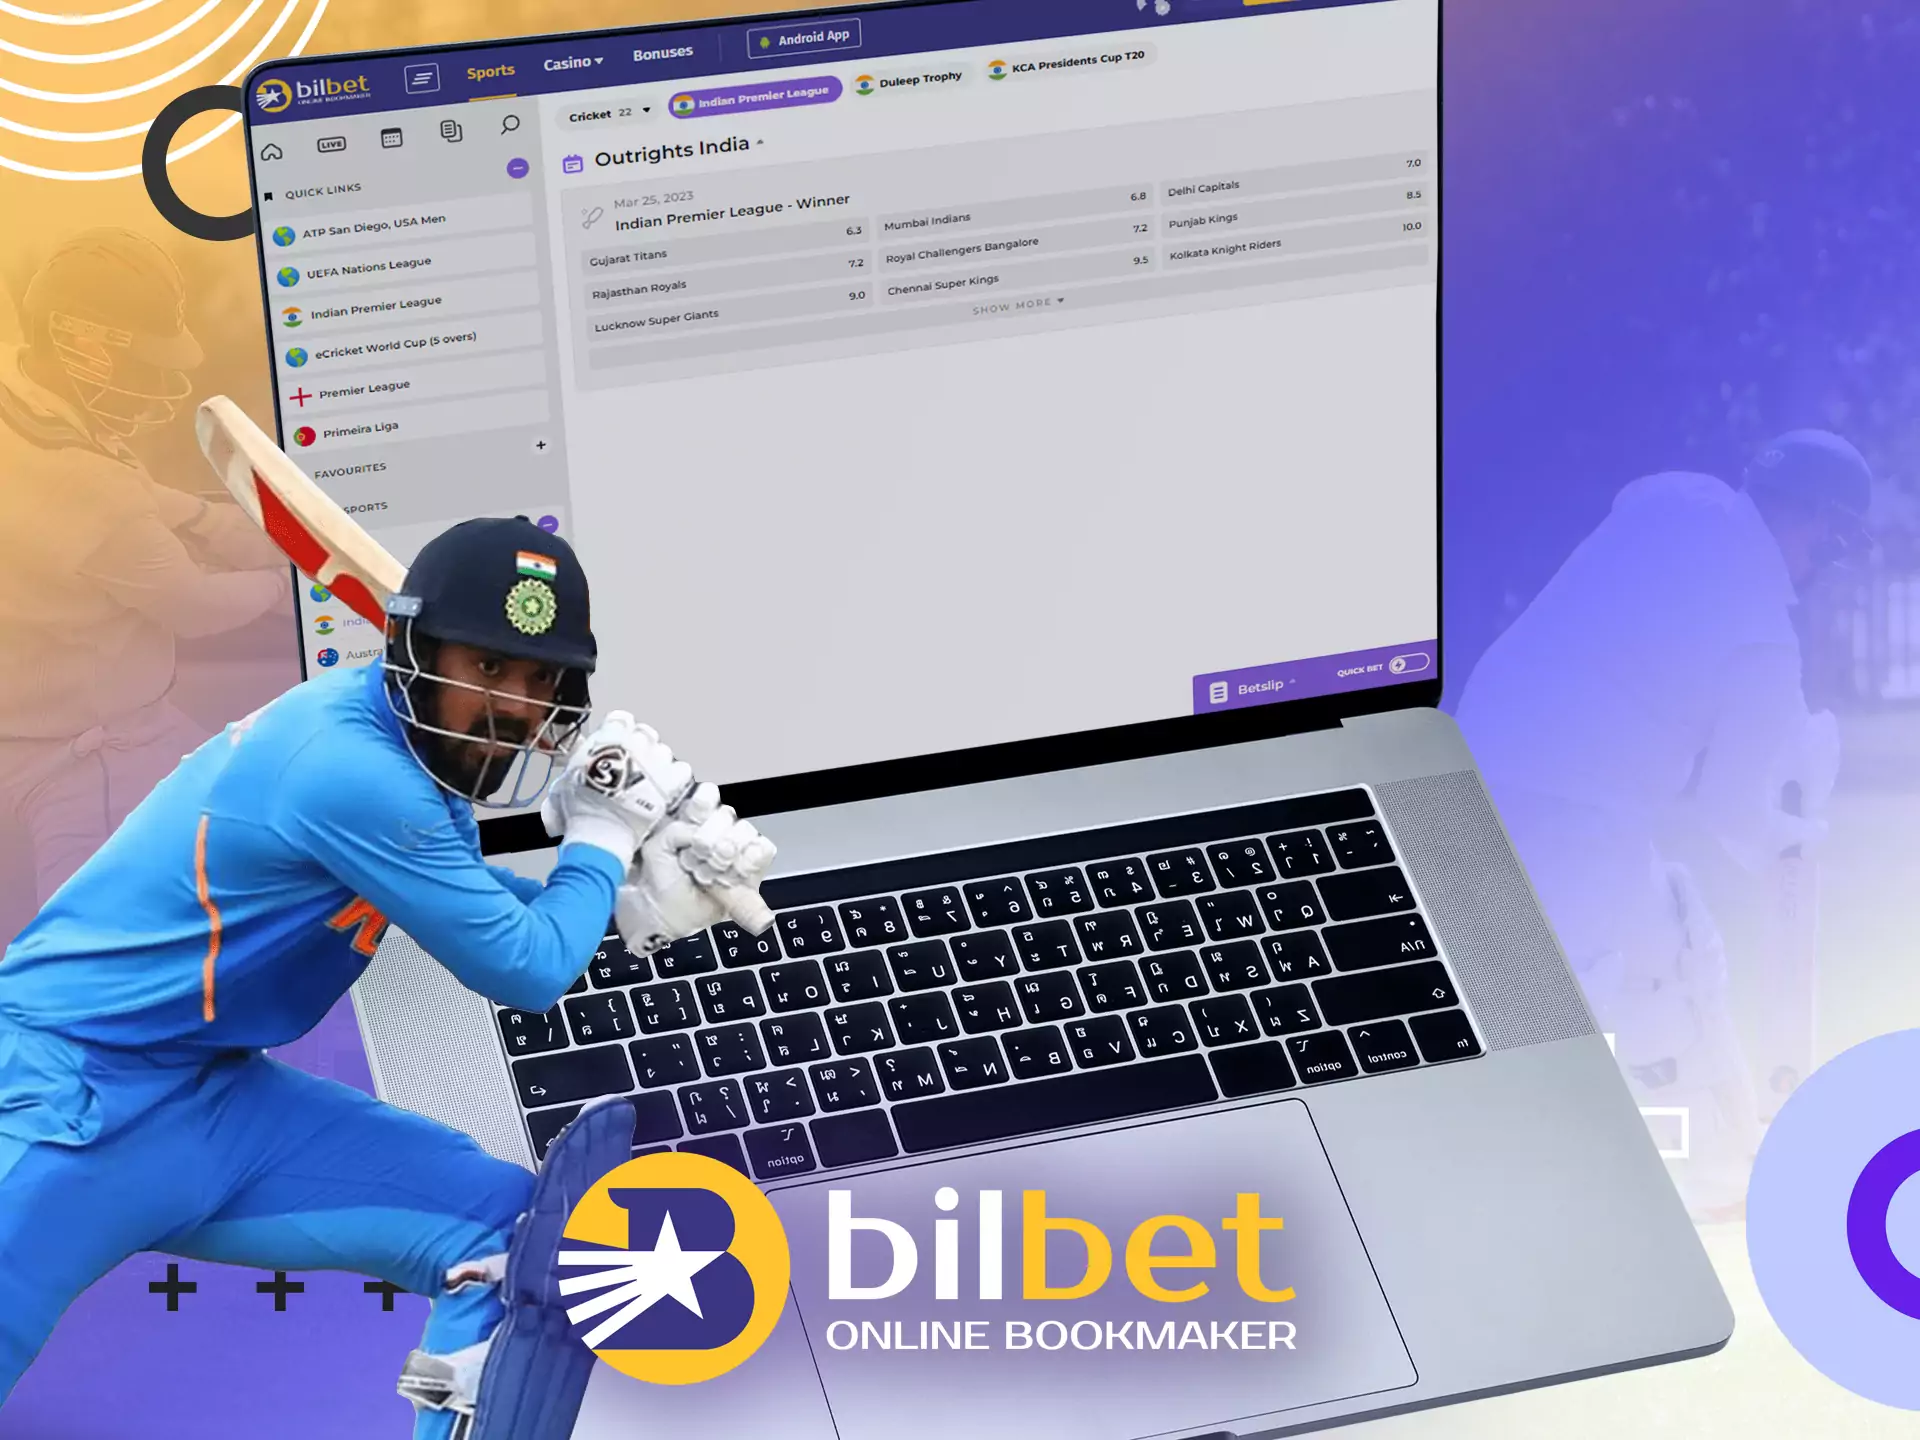 The vast majority of Indian users on Bilbet place bets on cricket.